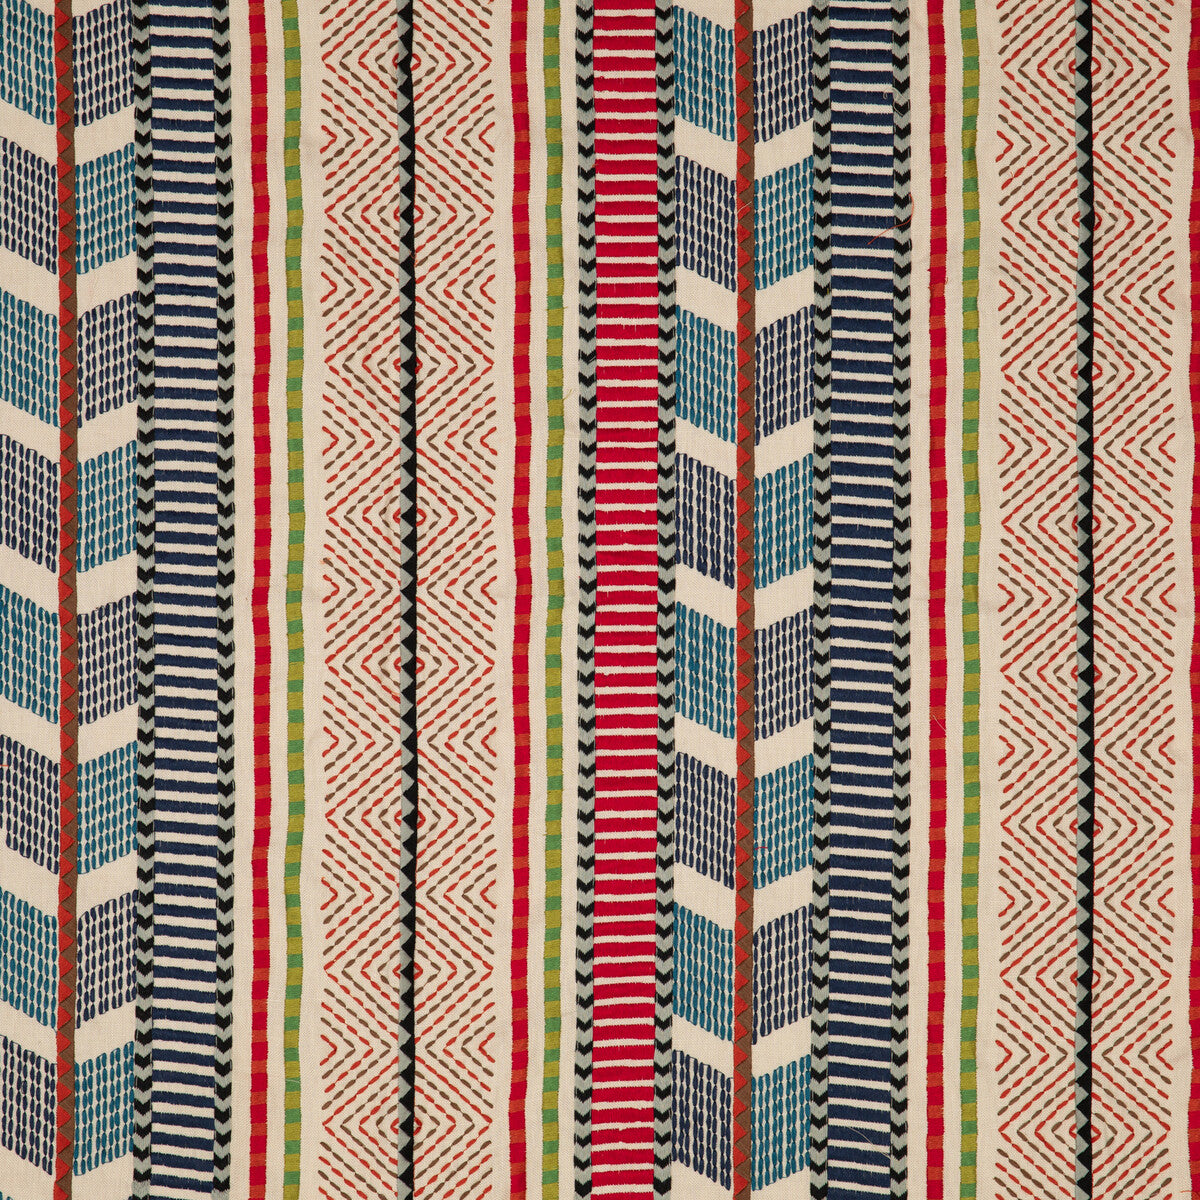 Rebozo fabric in multi color - pattern PF50472.1.0 - by Baker Lifestyle in the Fiesta collection